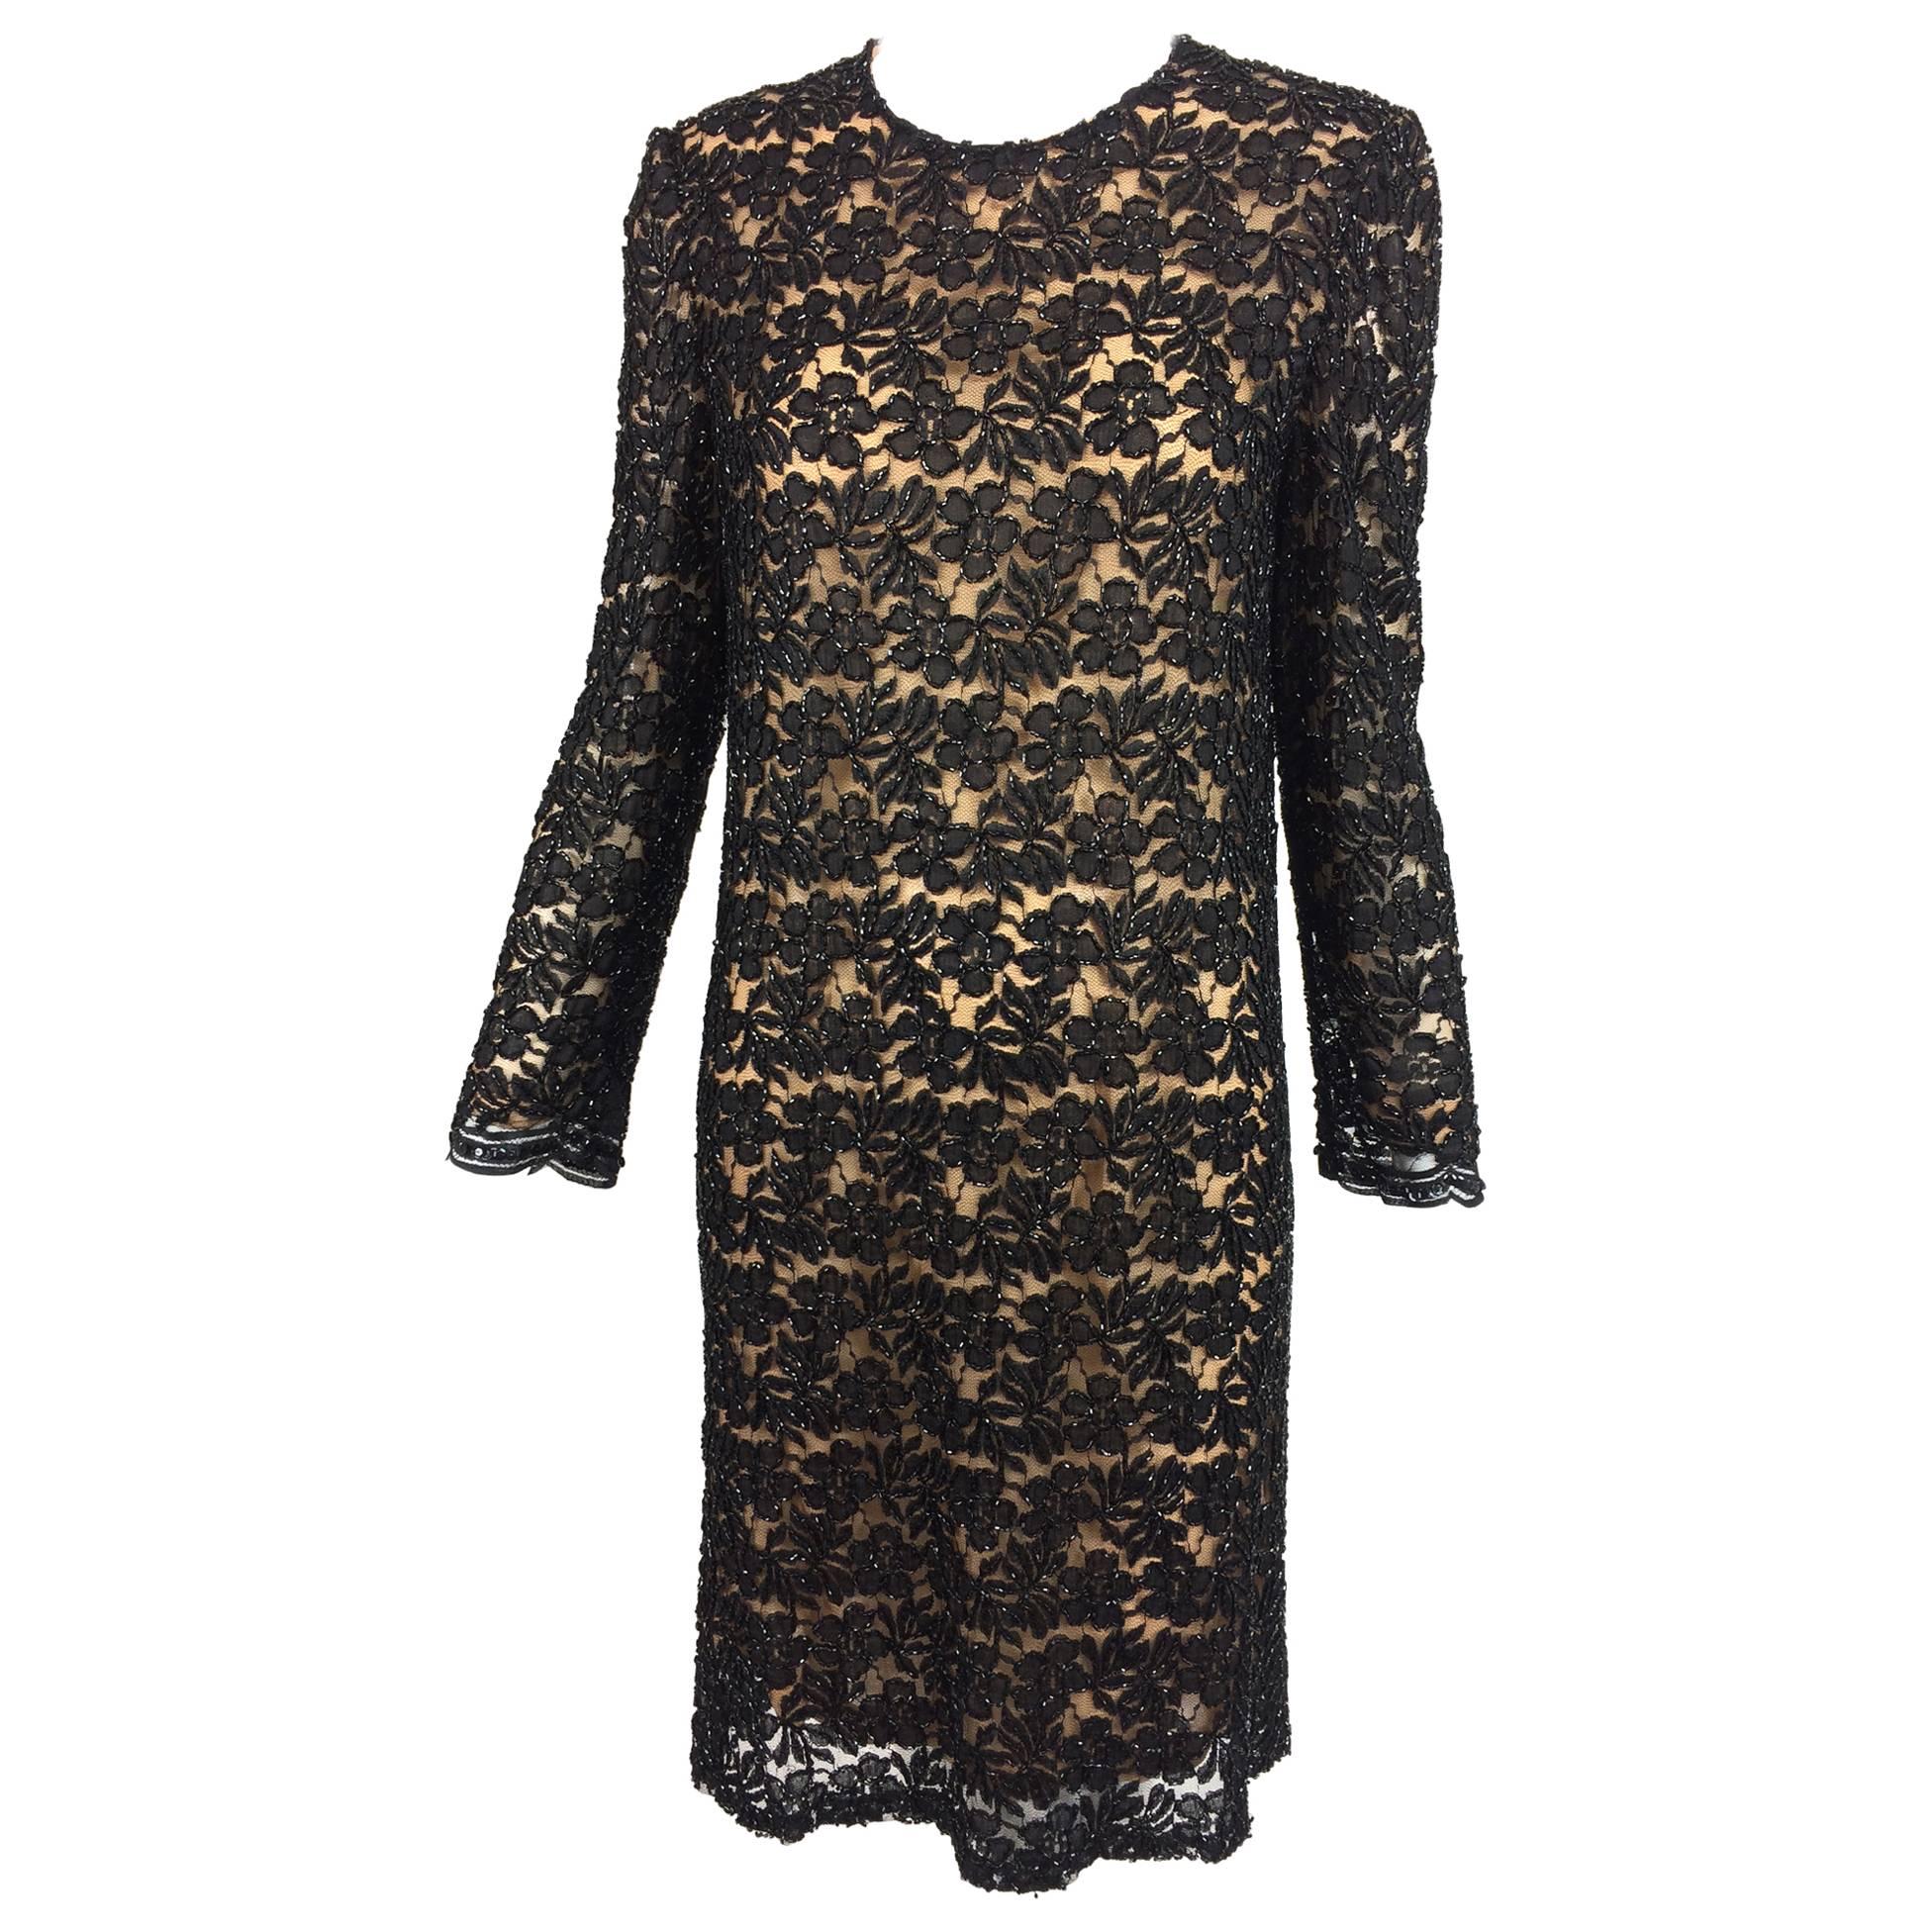 Vintage mod style beaded black floral lace nude lined cocktail dress 1960s